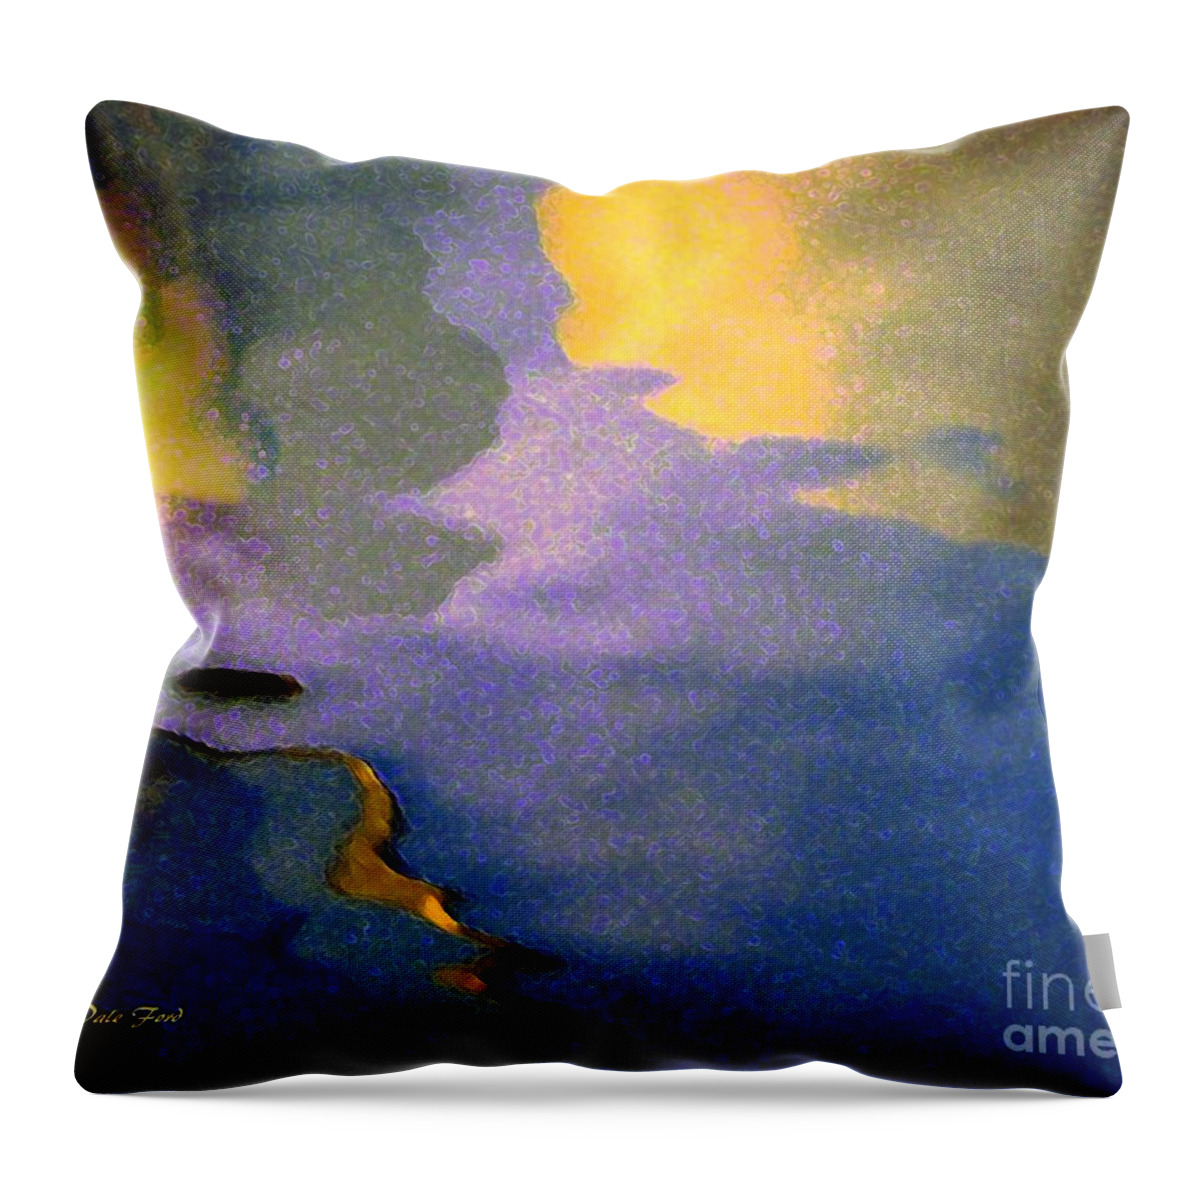  Throw Pillow featuring the digital art Strange Landscape 2 by Dale  Ford